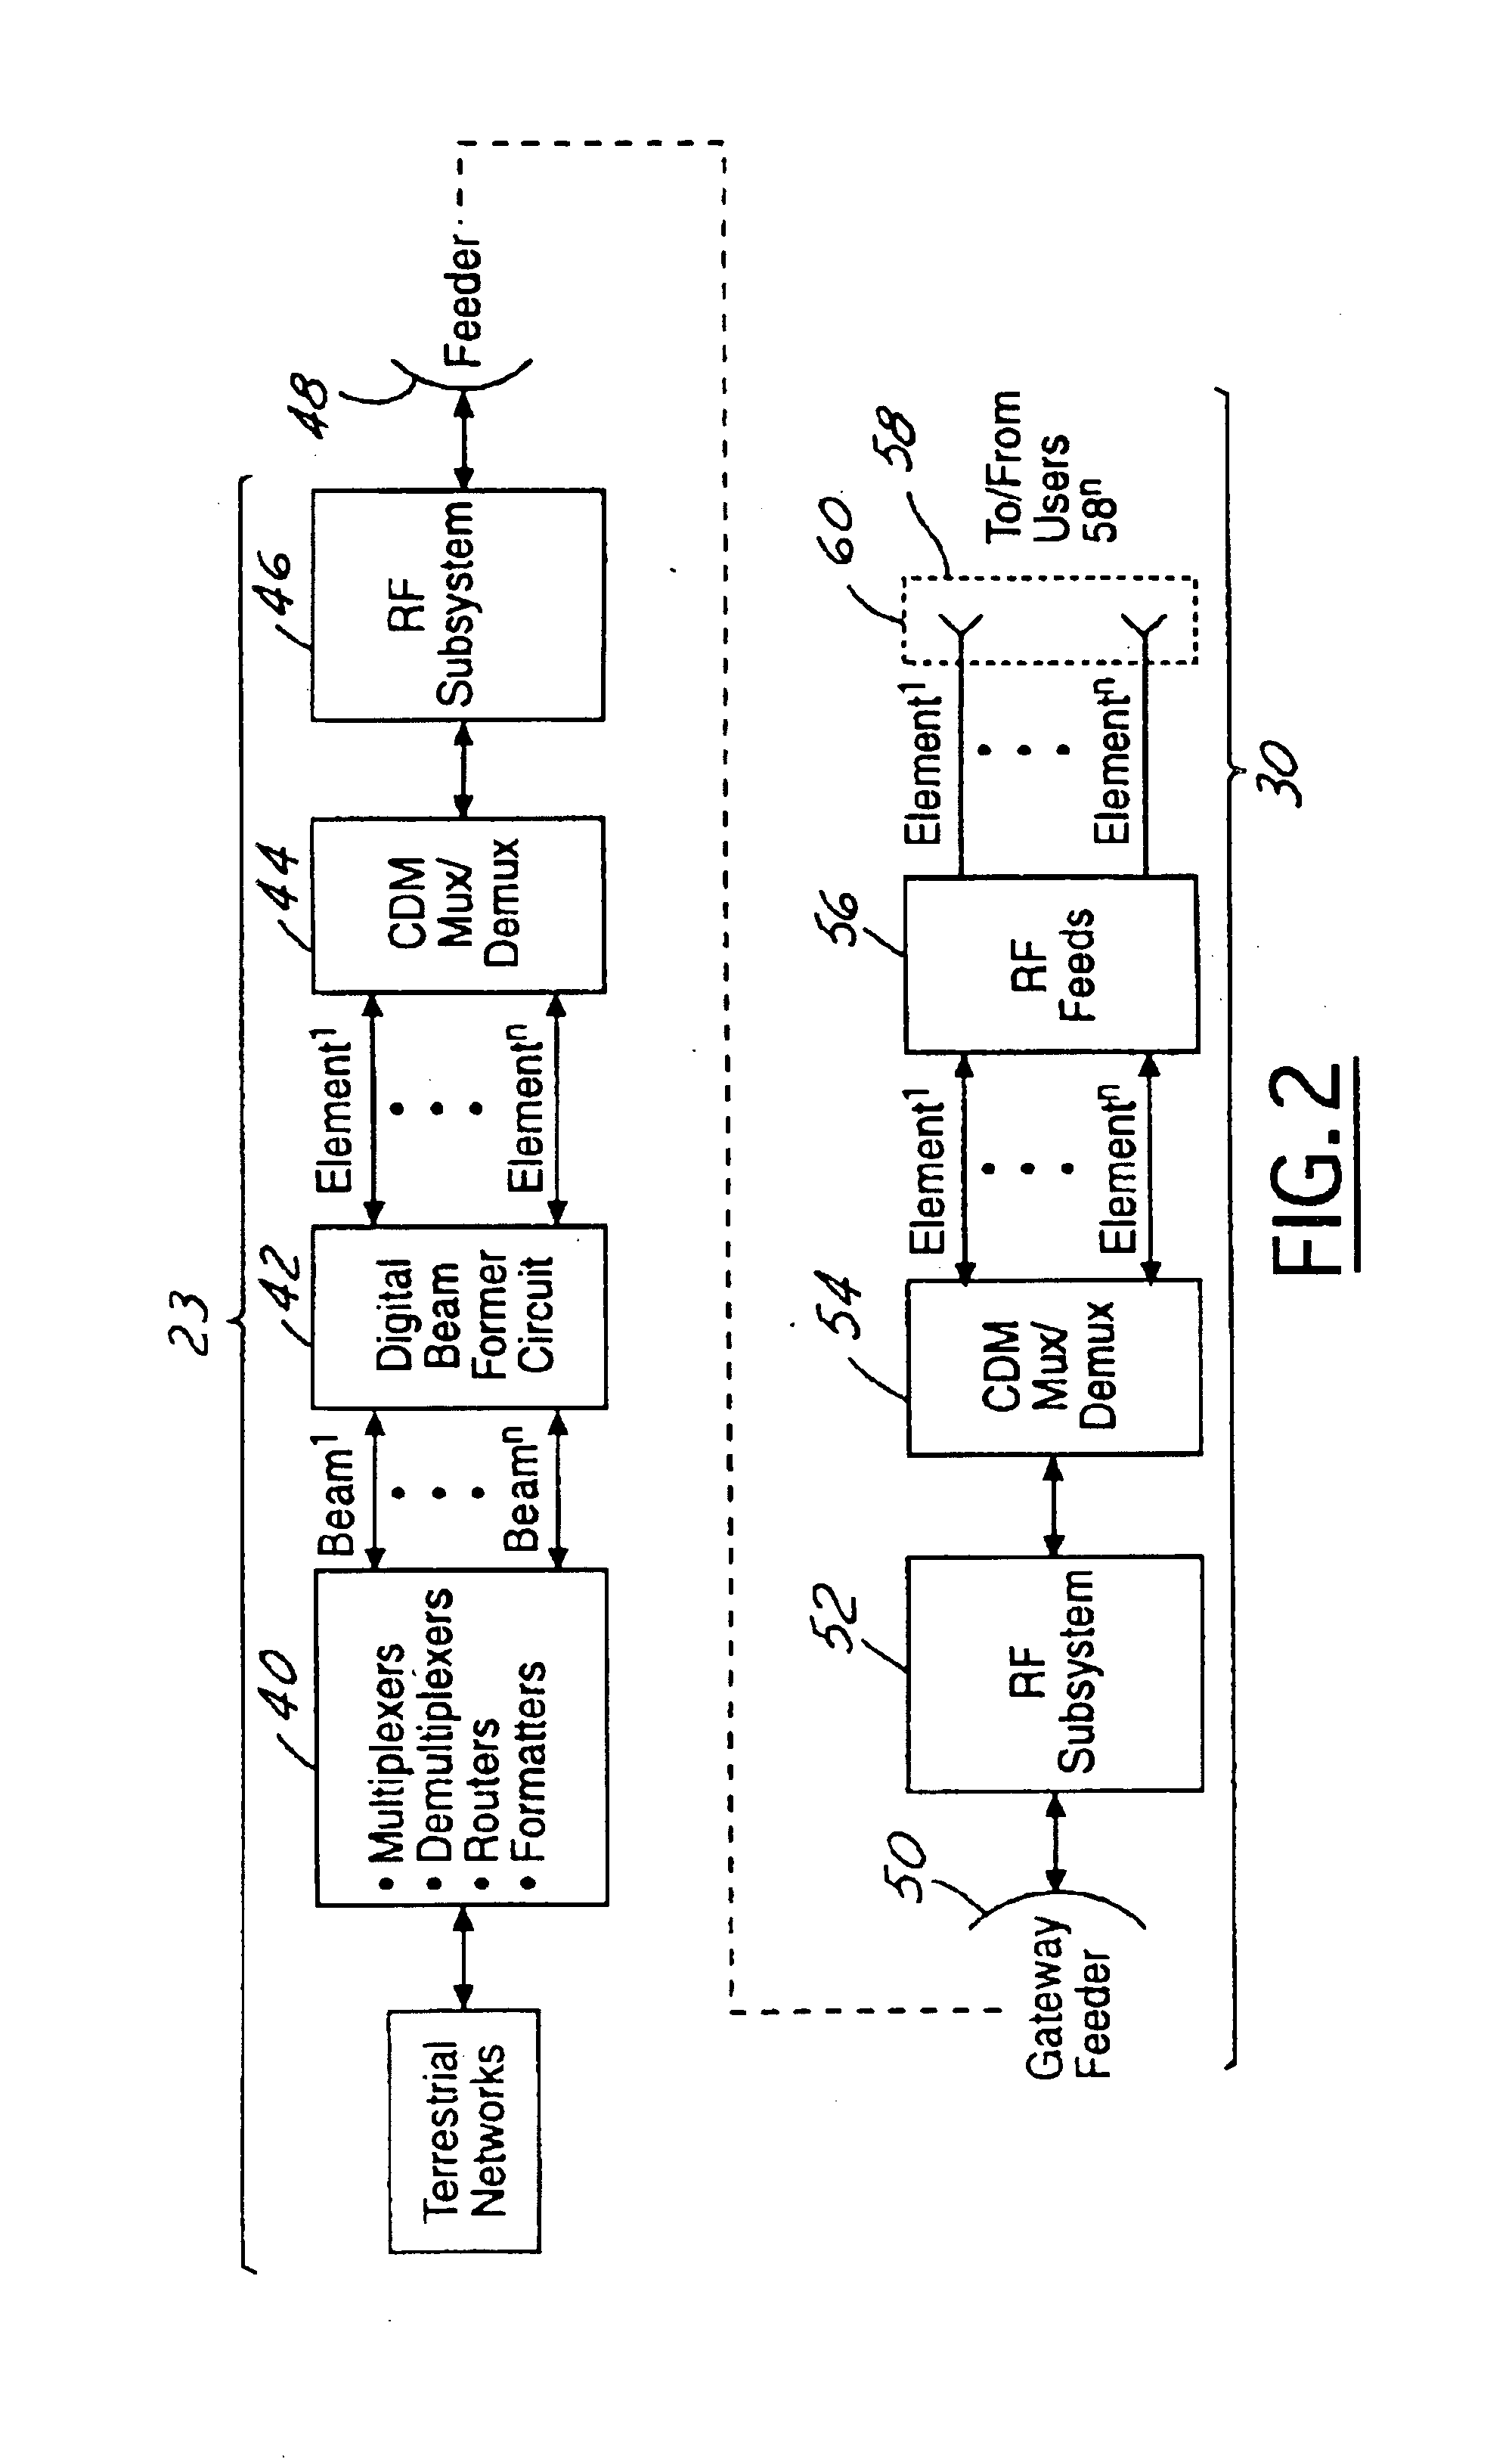 Stratospheric-based communication system for mobile users having adaptive interference rejection